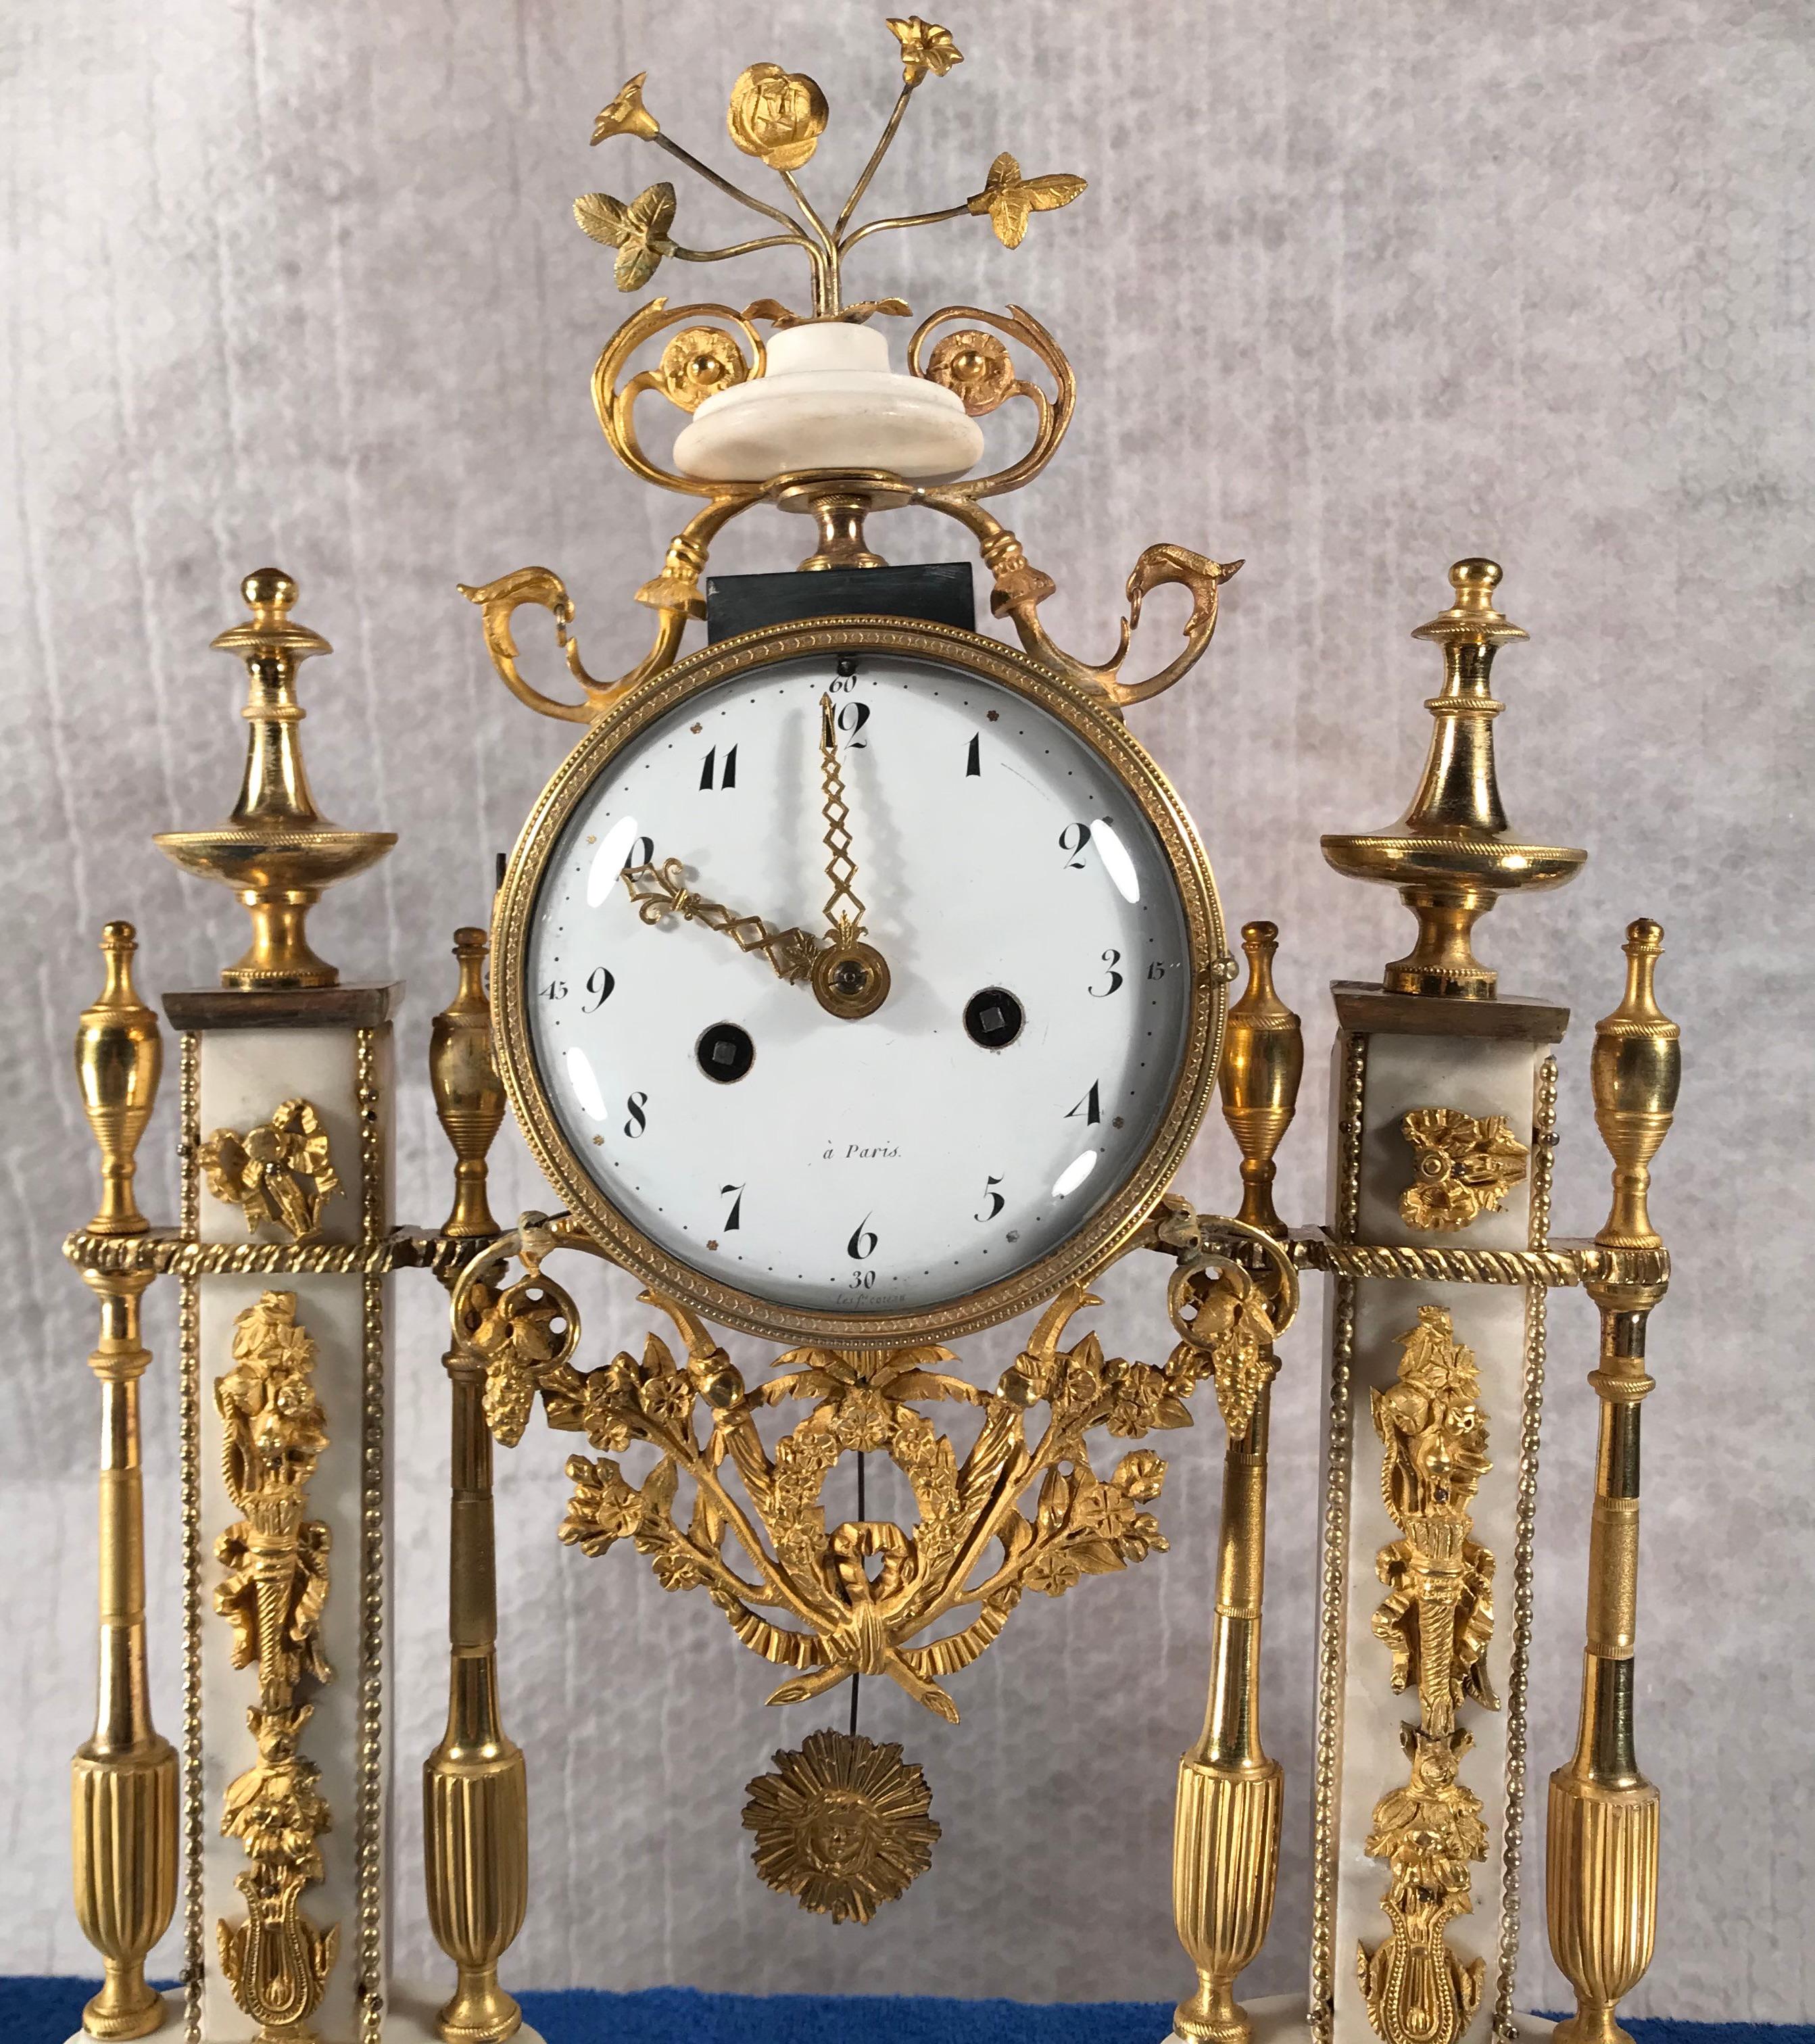 Louis XVI ormolu-mounted black and white marble mantel clock, Paris, 1800.
The white enamel dial with black Arabic numerals is contained within a drum-shaped case. The case flanked by gilt bronze mounted pilaster set on top of a black marble